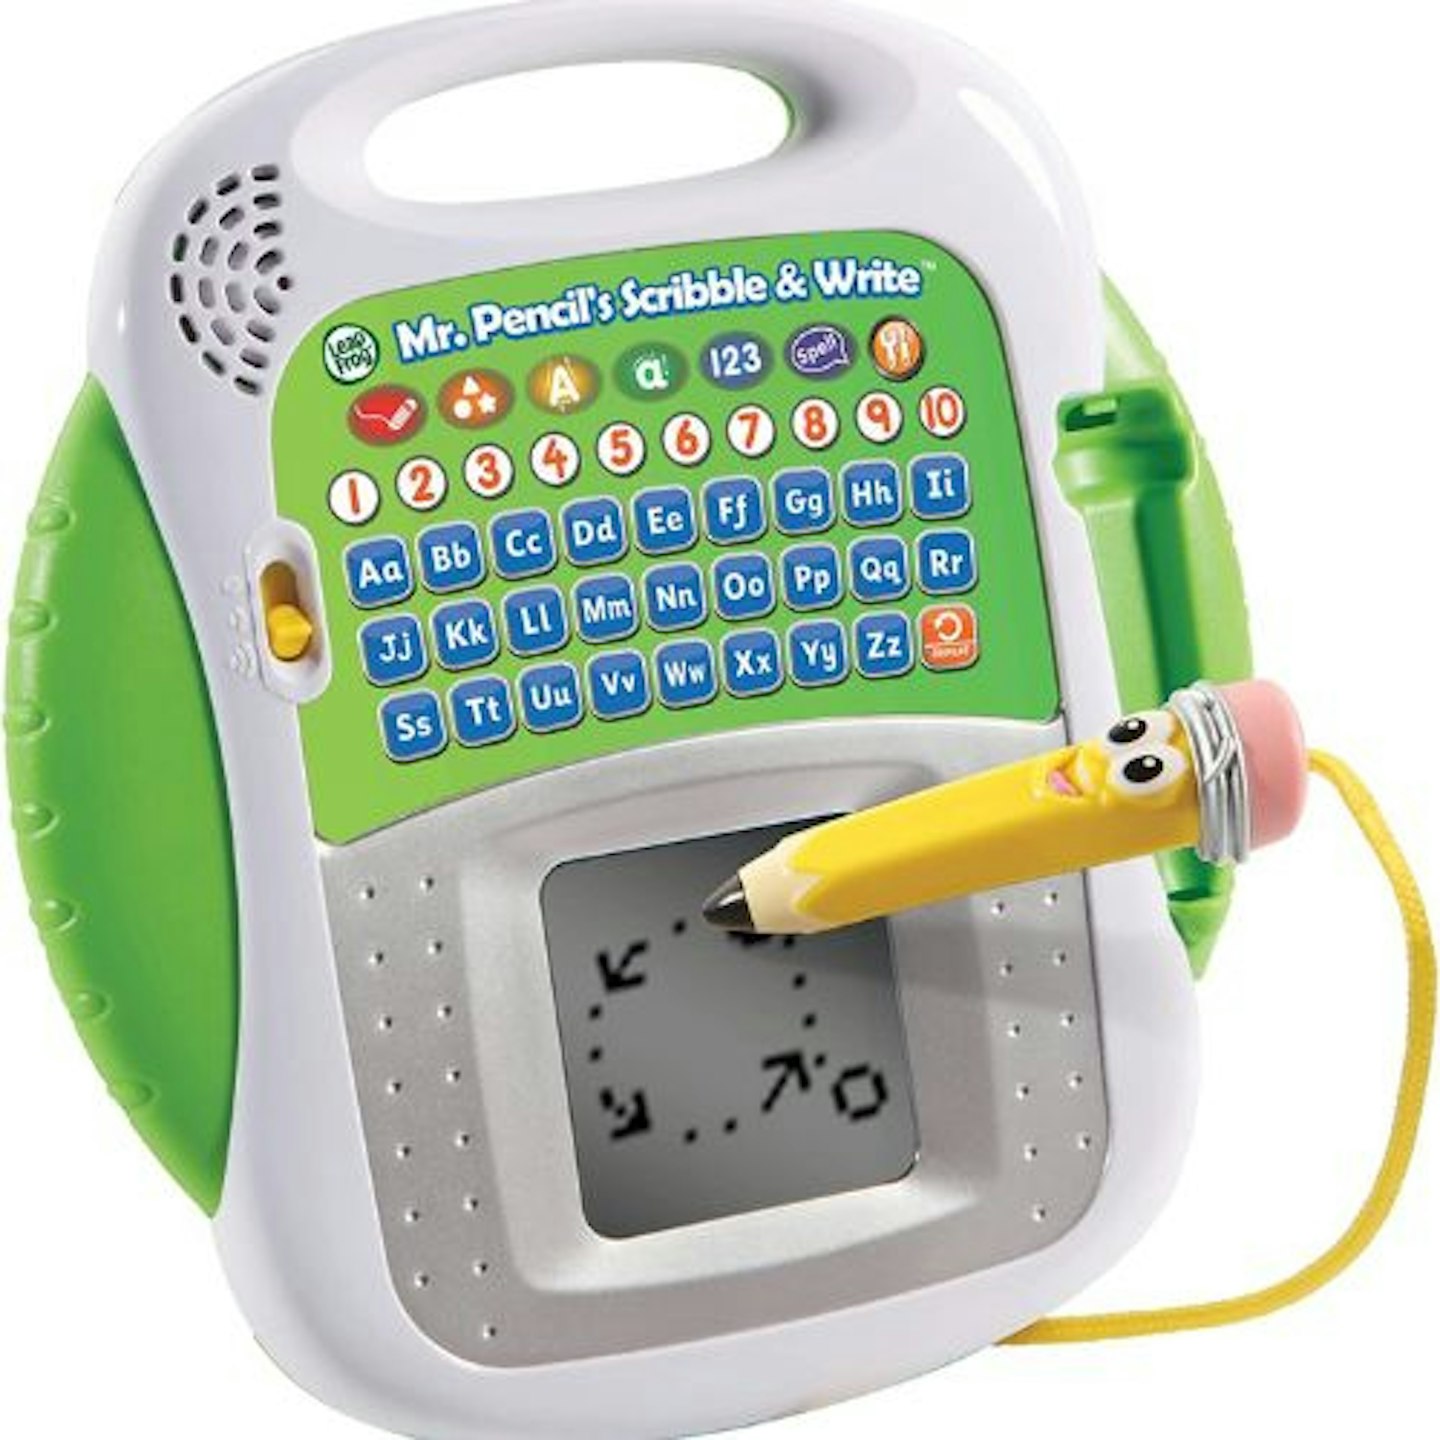 LeapFrog-600803-Mr-Pencils-Scribble-and-Write-Interactive-Learning-Toy